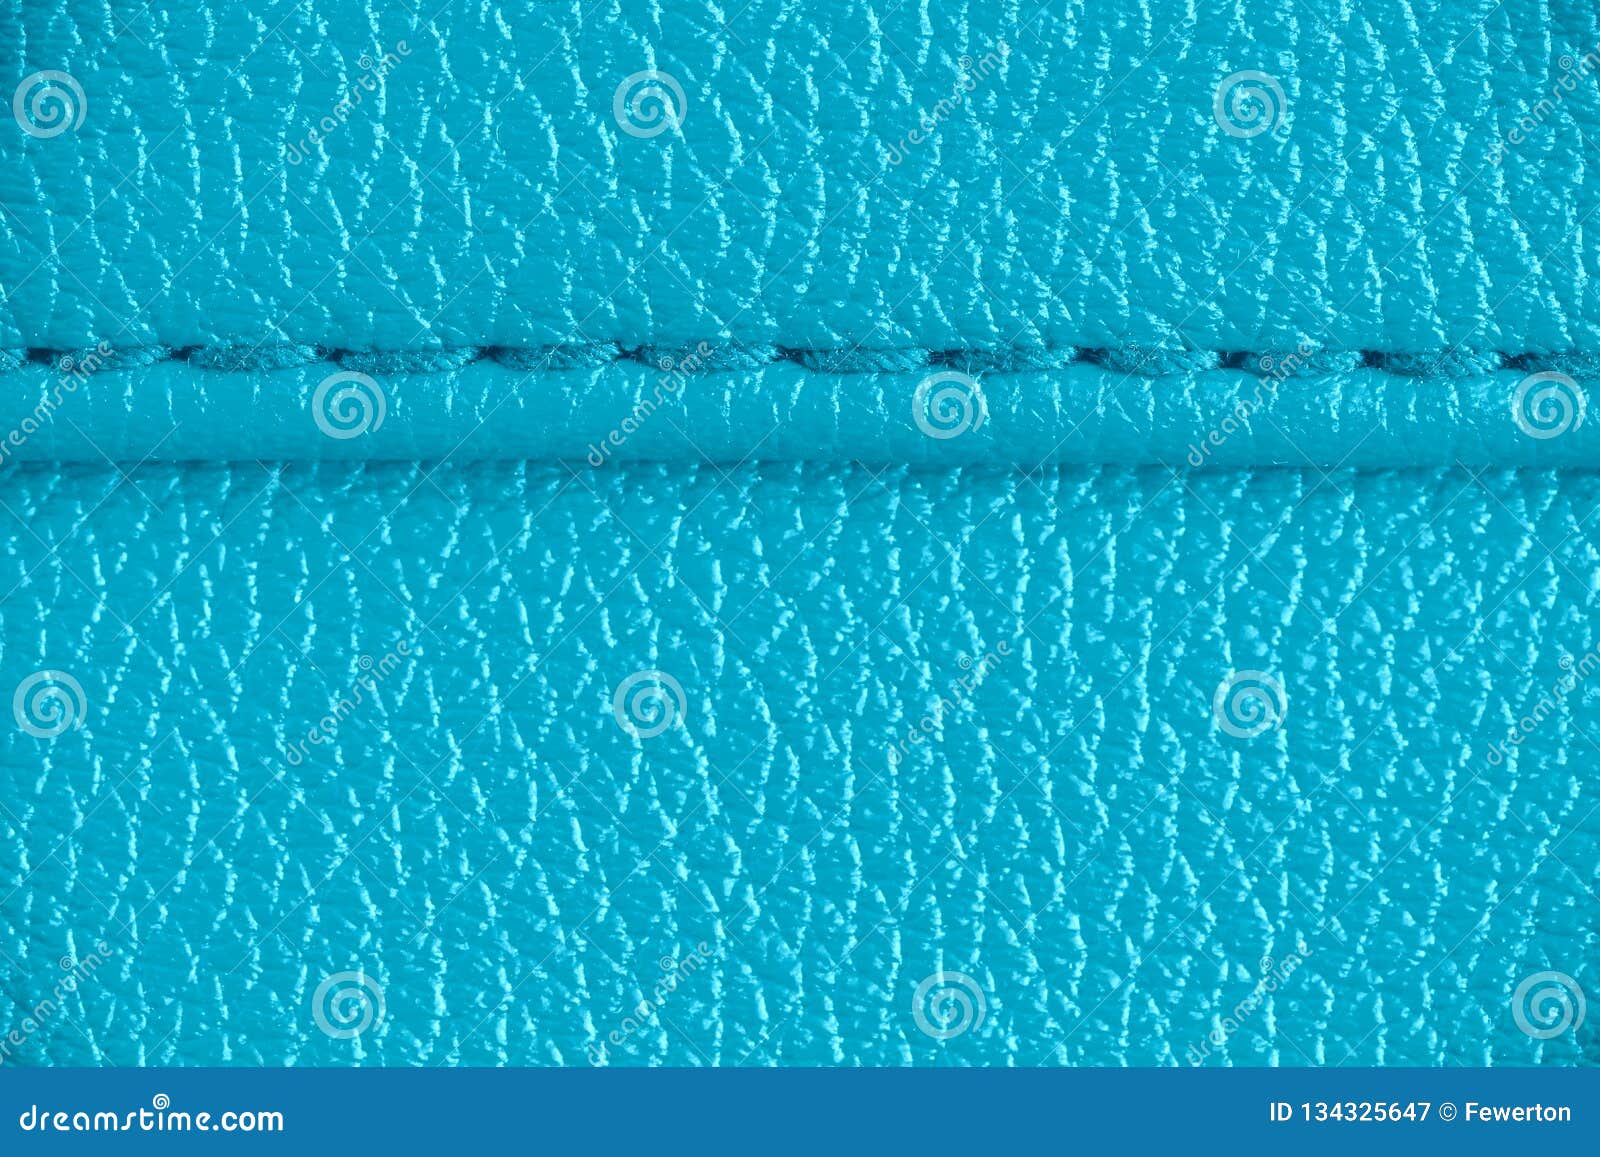 Two Layers of Blue Cyan Leather Textile Sewed Stitched Tightly Together ...